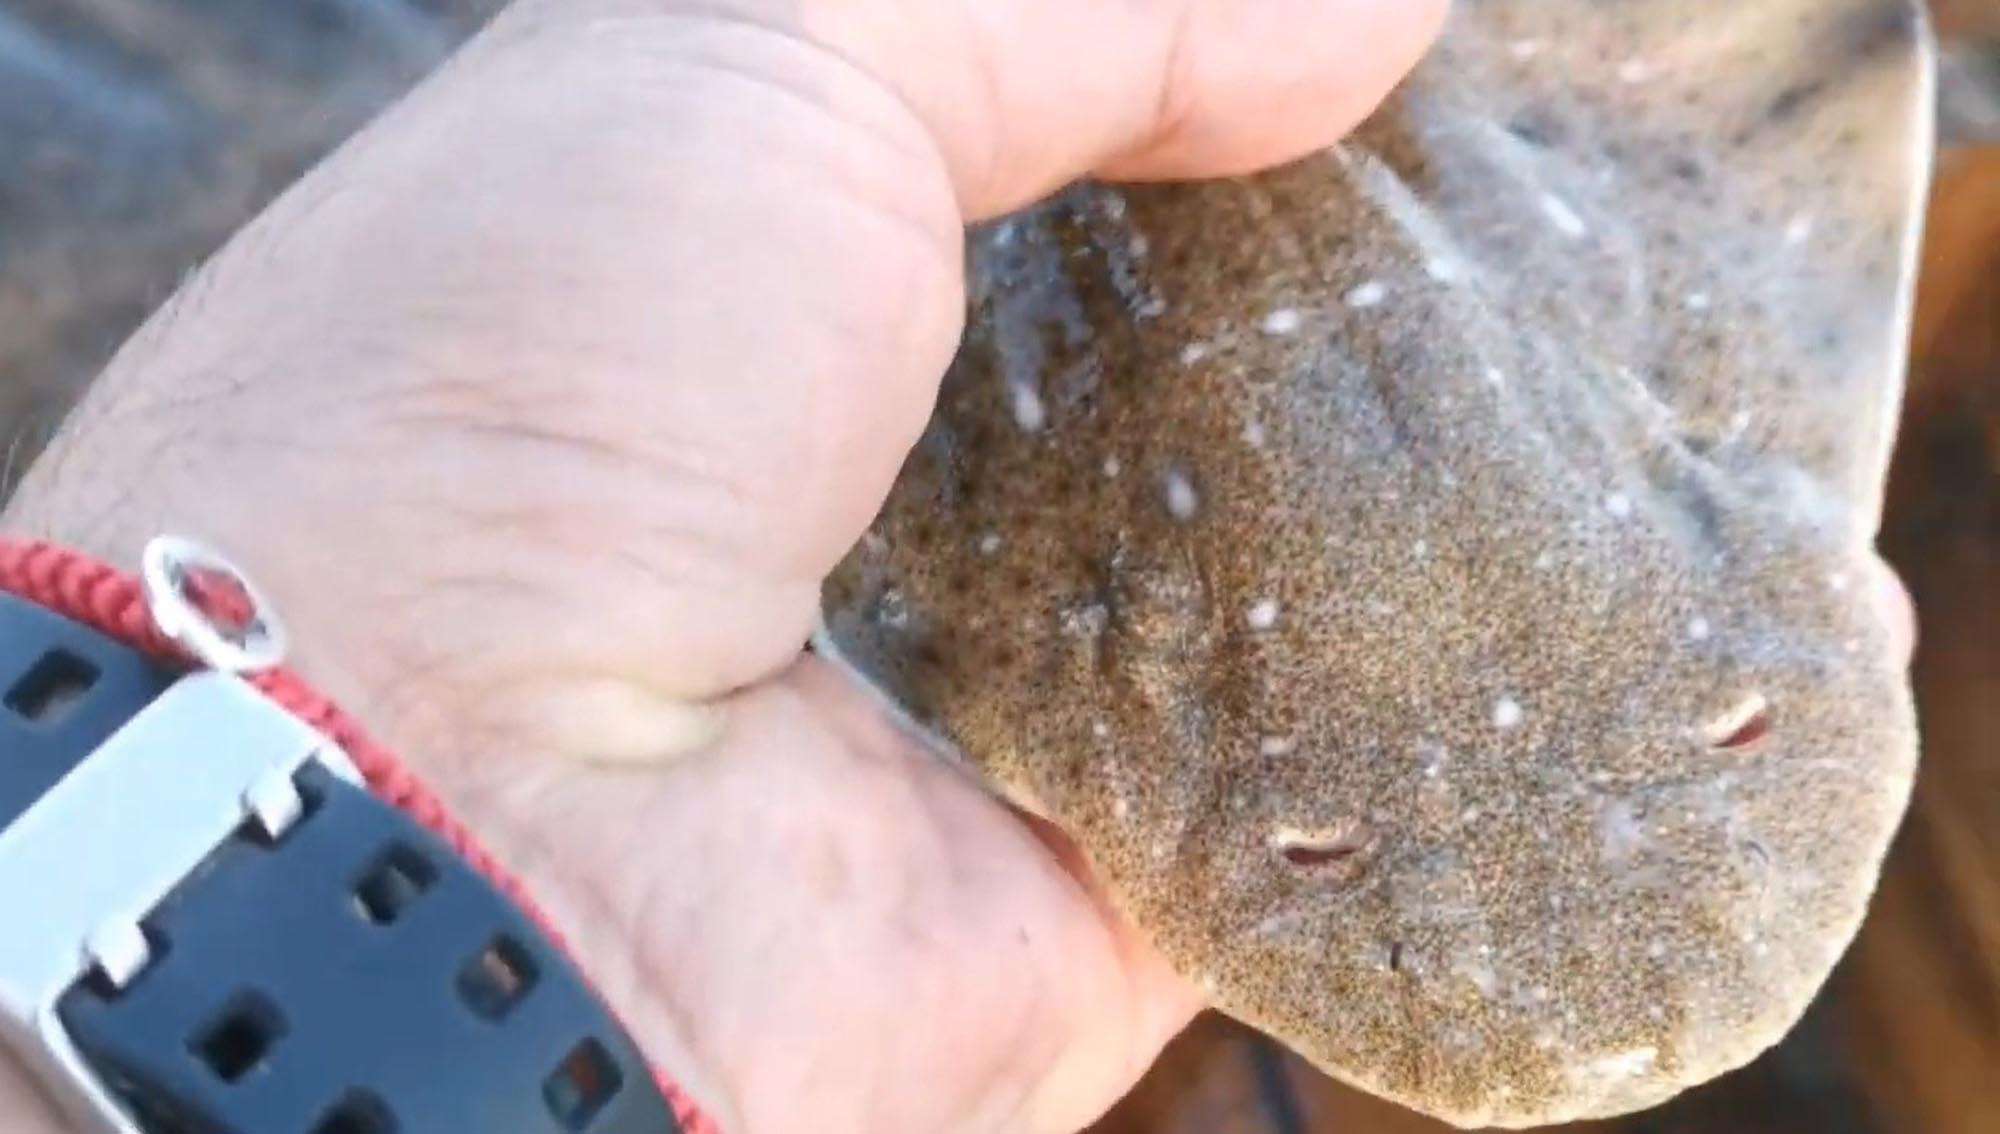 Rare Angelshark Gives Birth After Being Landed On Boat